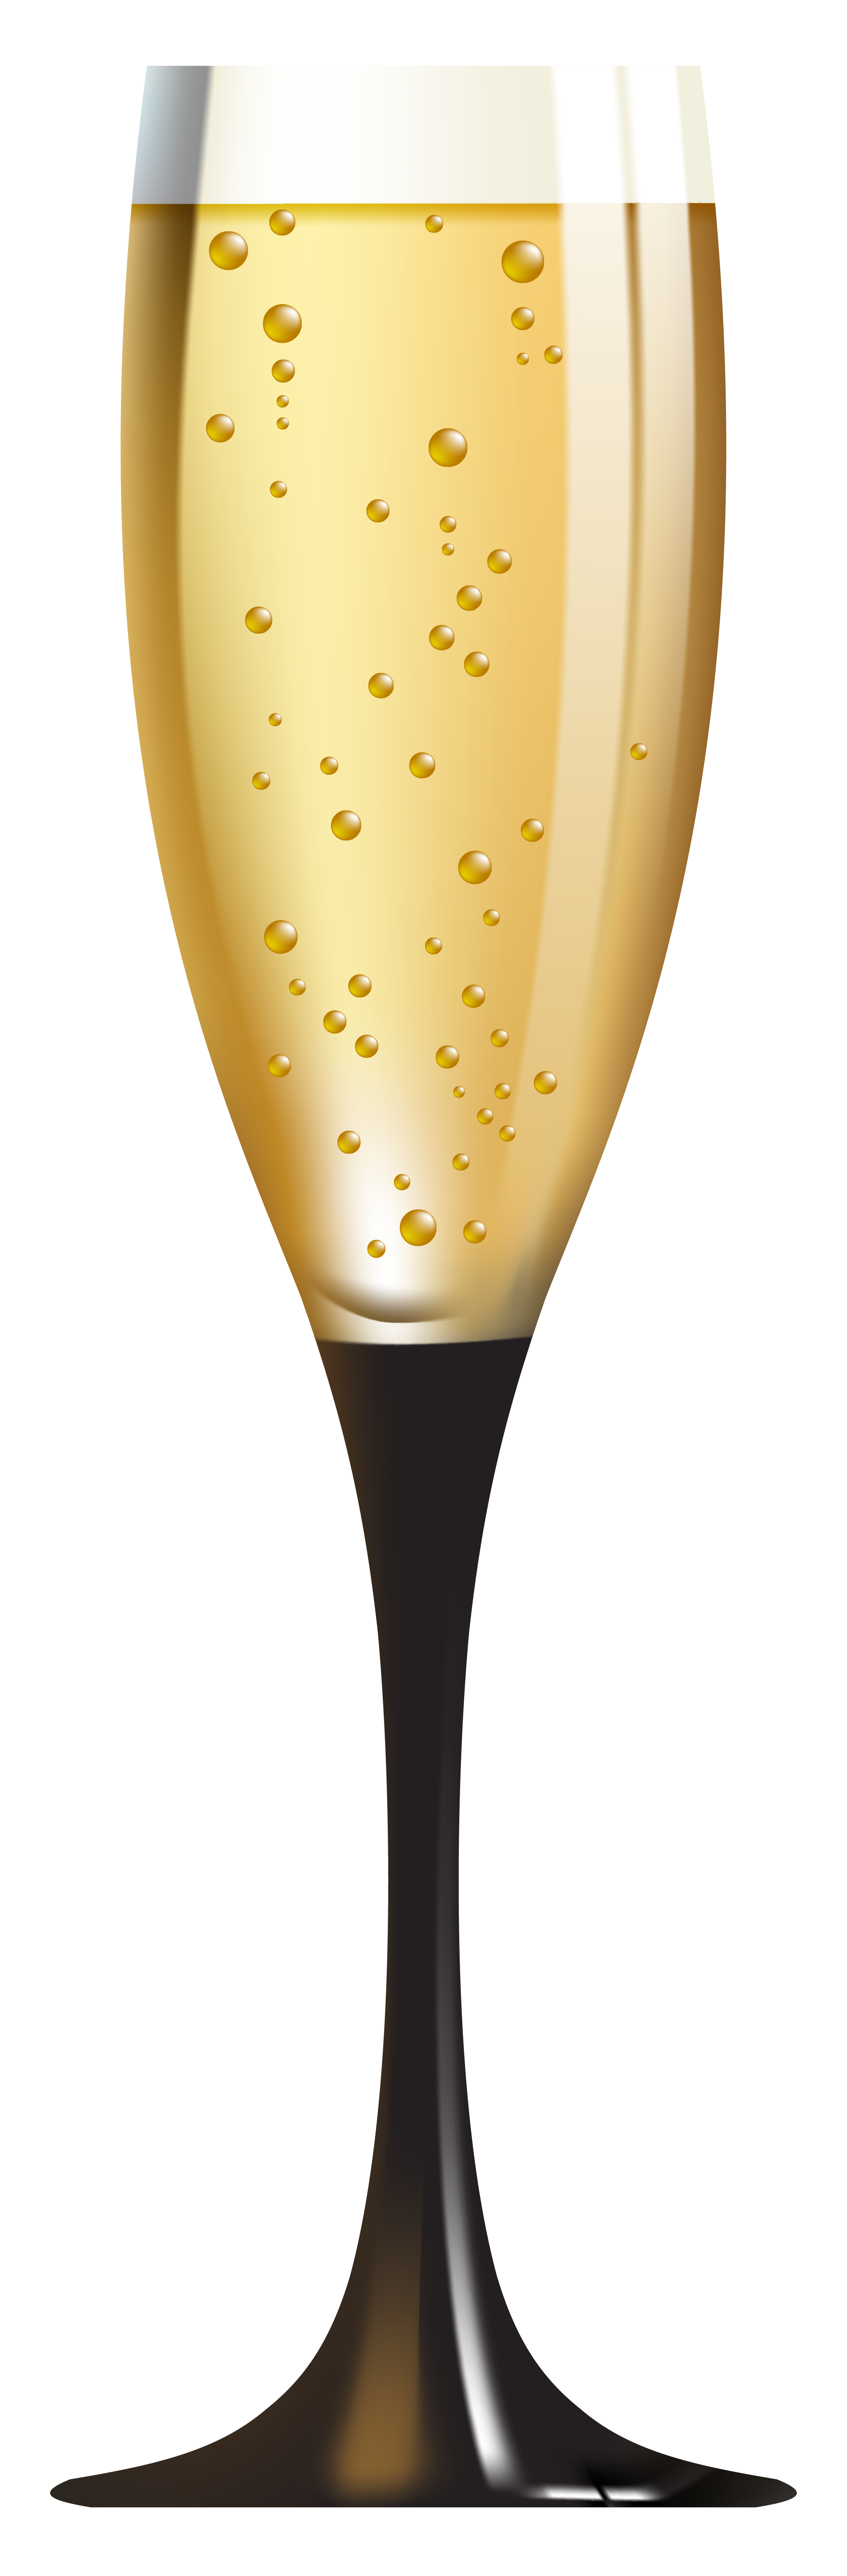 Champagne glass clip art. Clipart cup translucent